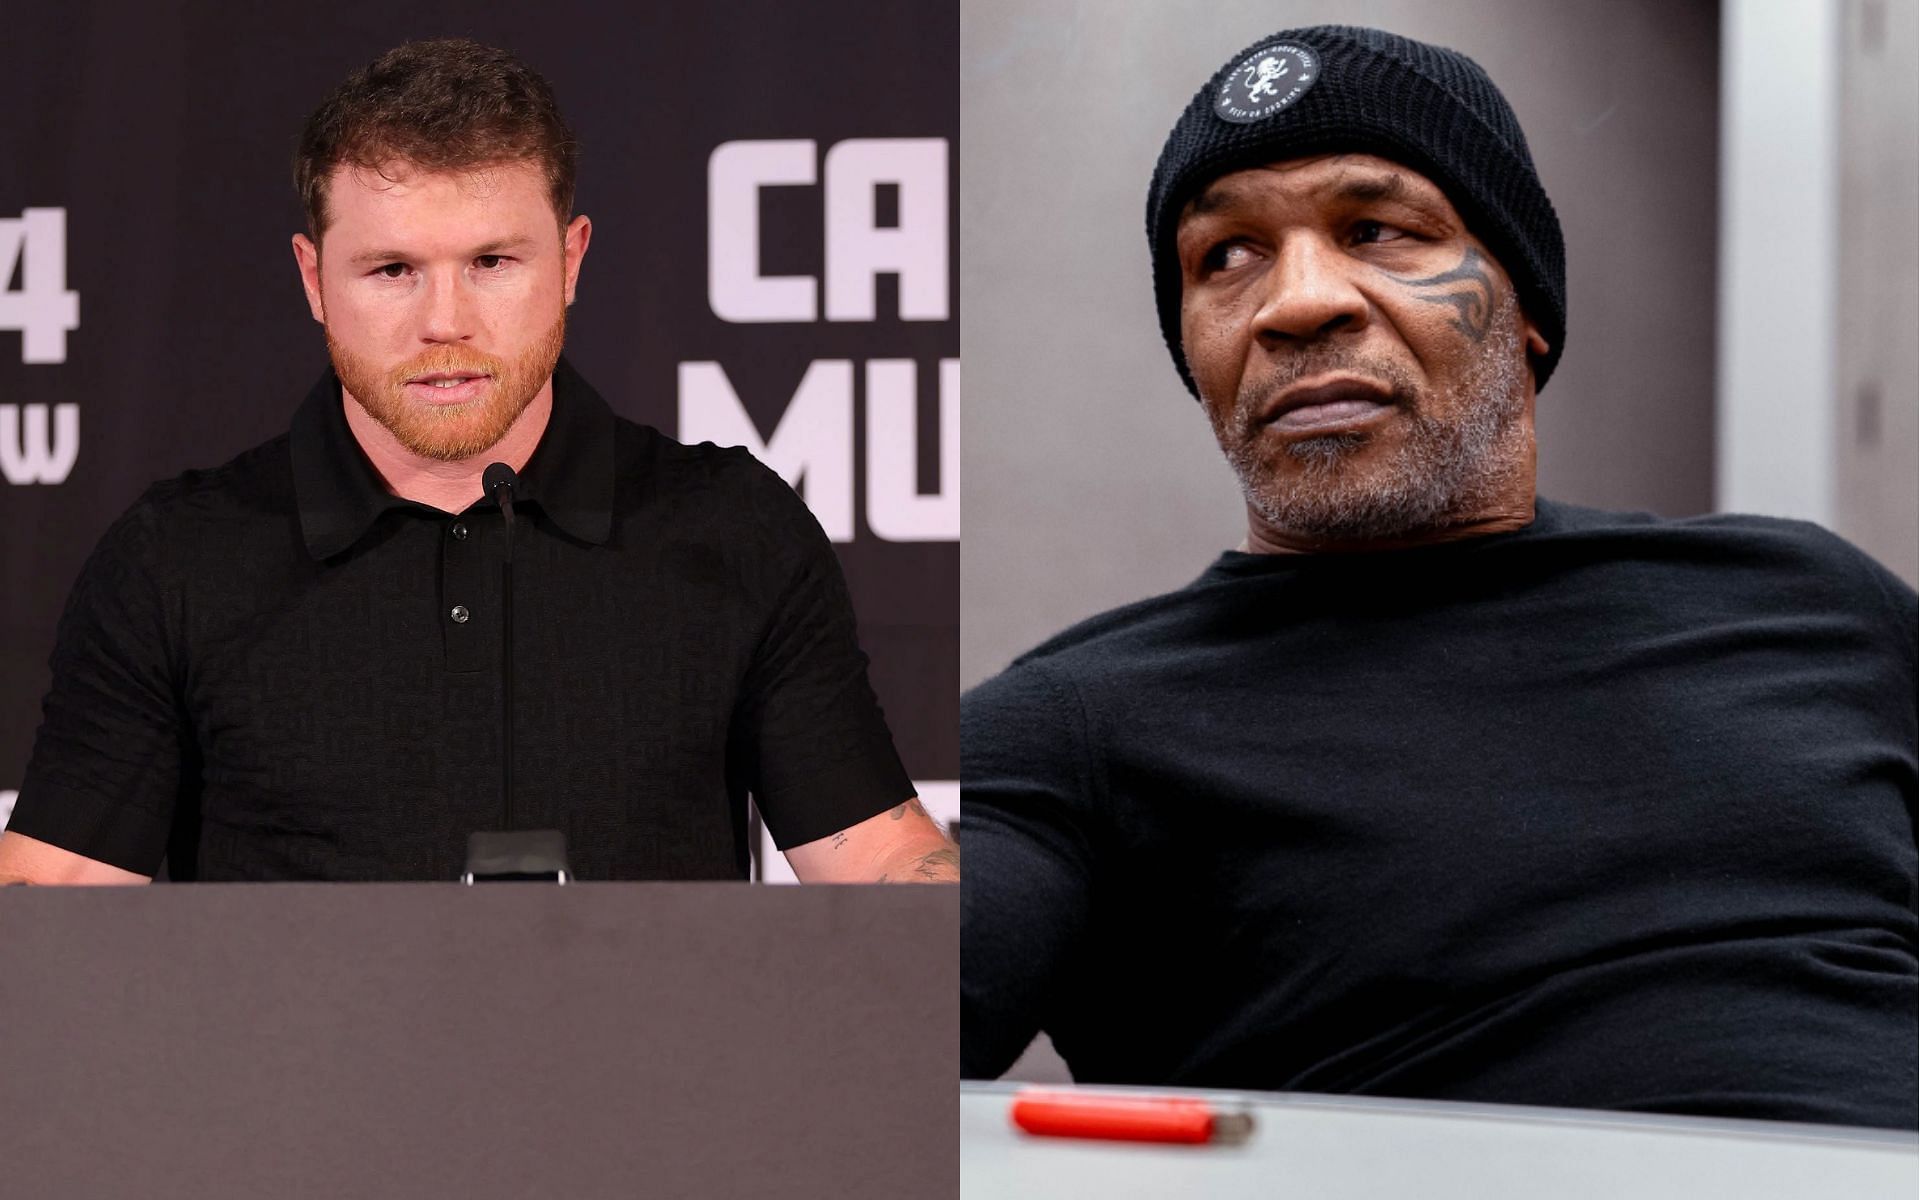 Canelo Alvarez (left) takes aim at Mike Tyson (right) following recent criticism [Images Courtesy: @GettyImages, @miketyson on Instagram]